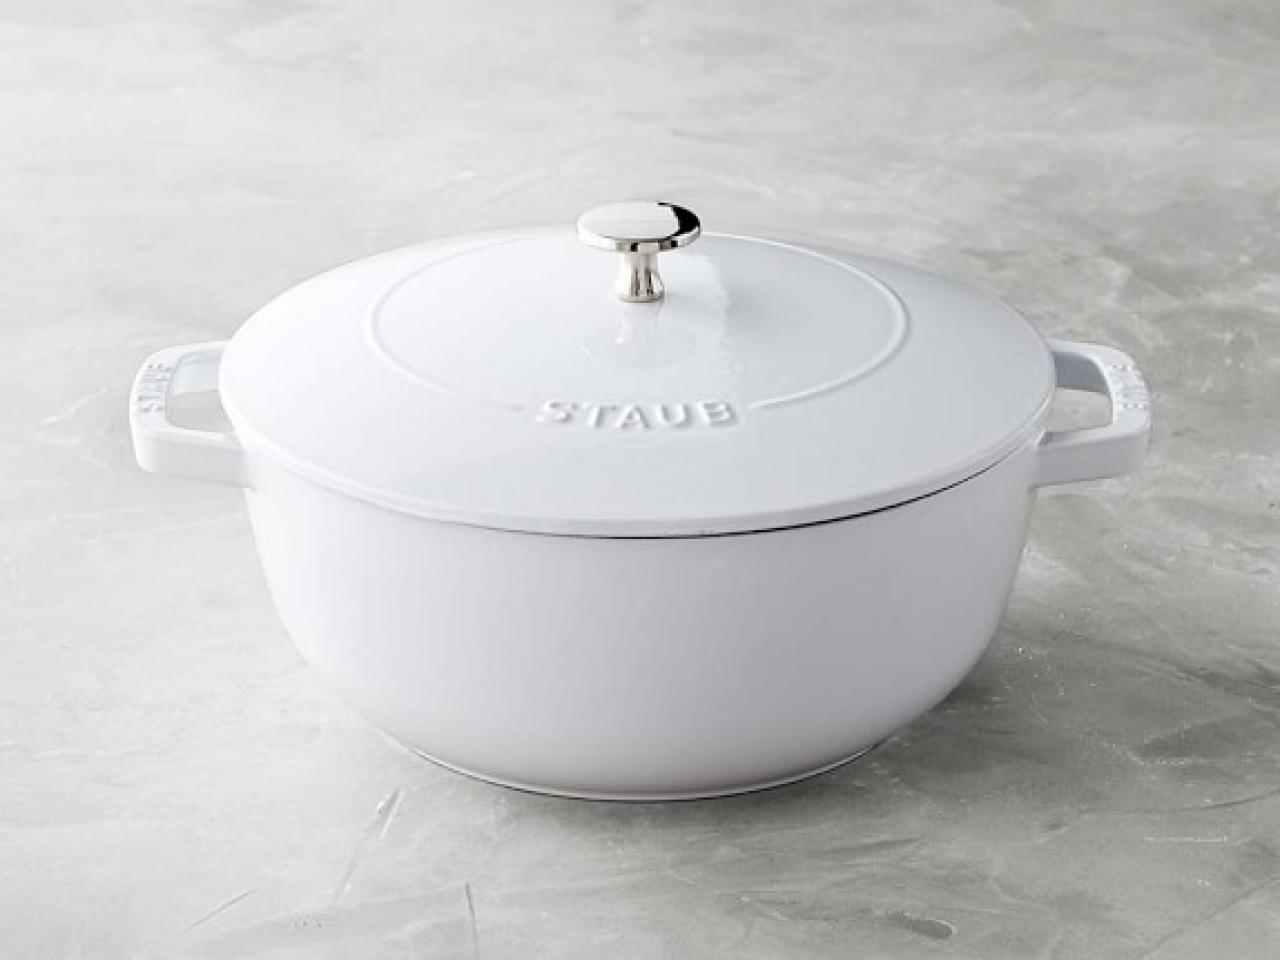 https://food.fnr.sndimg.com/content/dam/images/food/products/2019/4/25/rx_staub-cast-iron-essential-oven-3-34-qt-white.jpeg.rend.hgtvcom.1280.960.suffix/1556204821539.jpeg